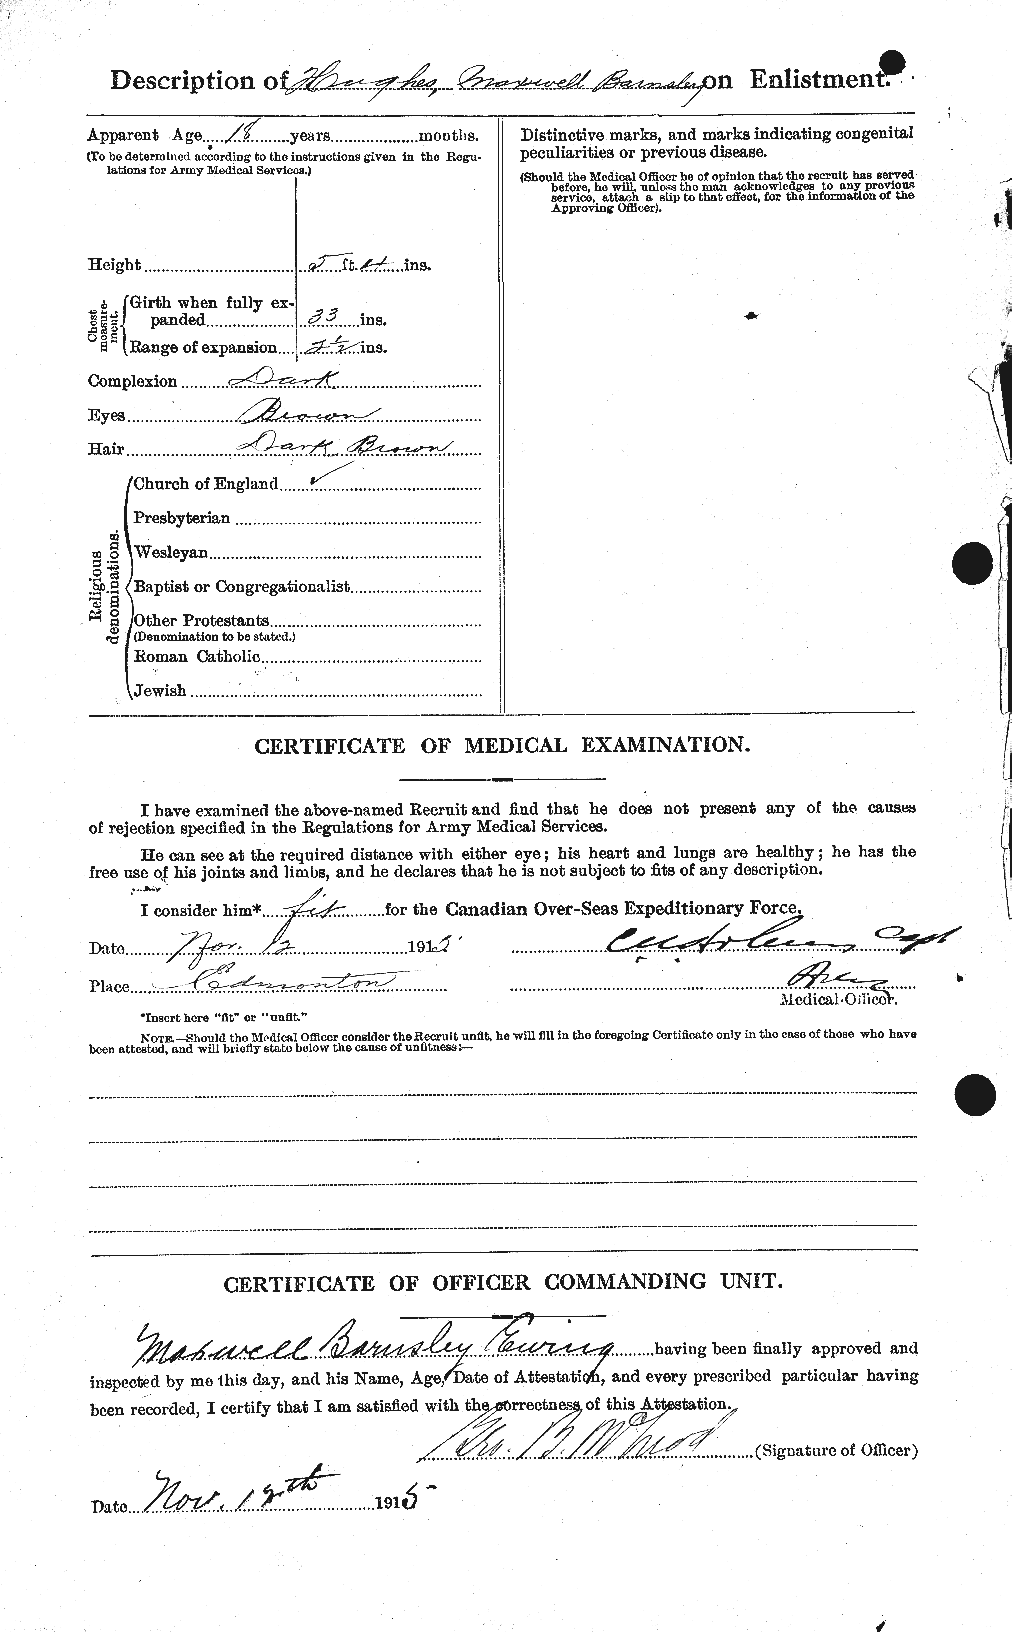 Personnel Records of the First World War - CEF 404118b